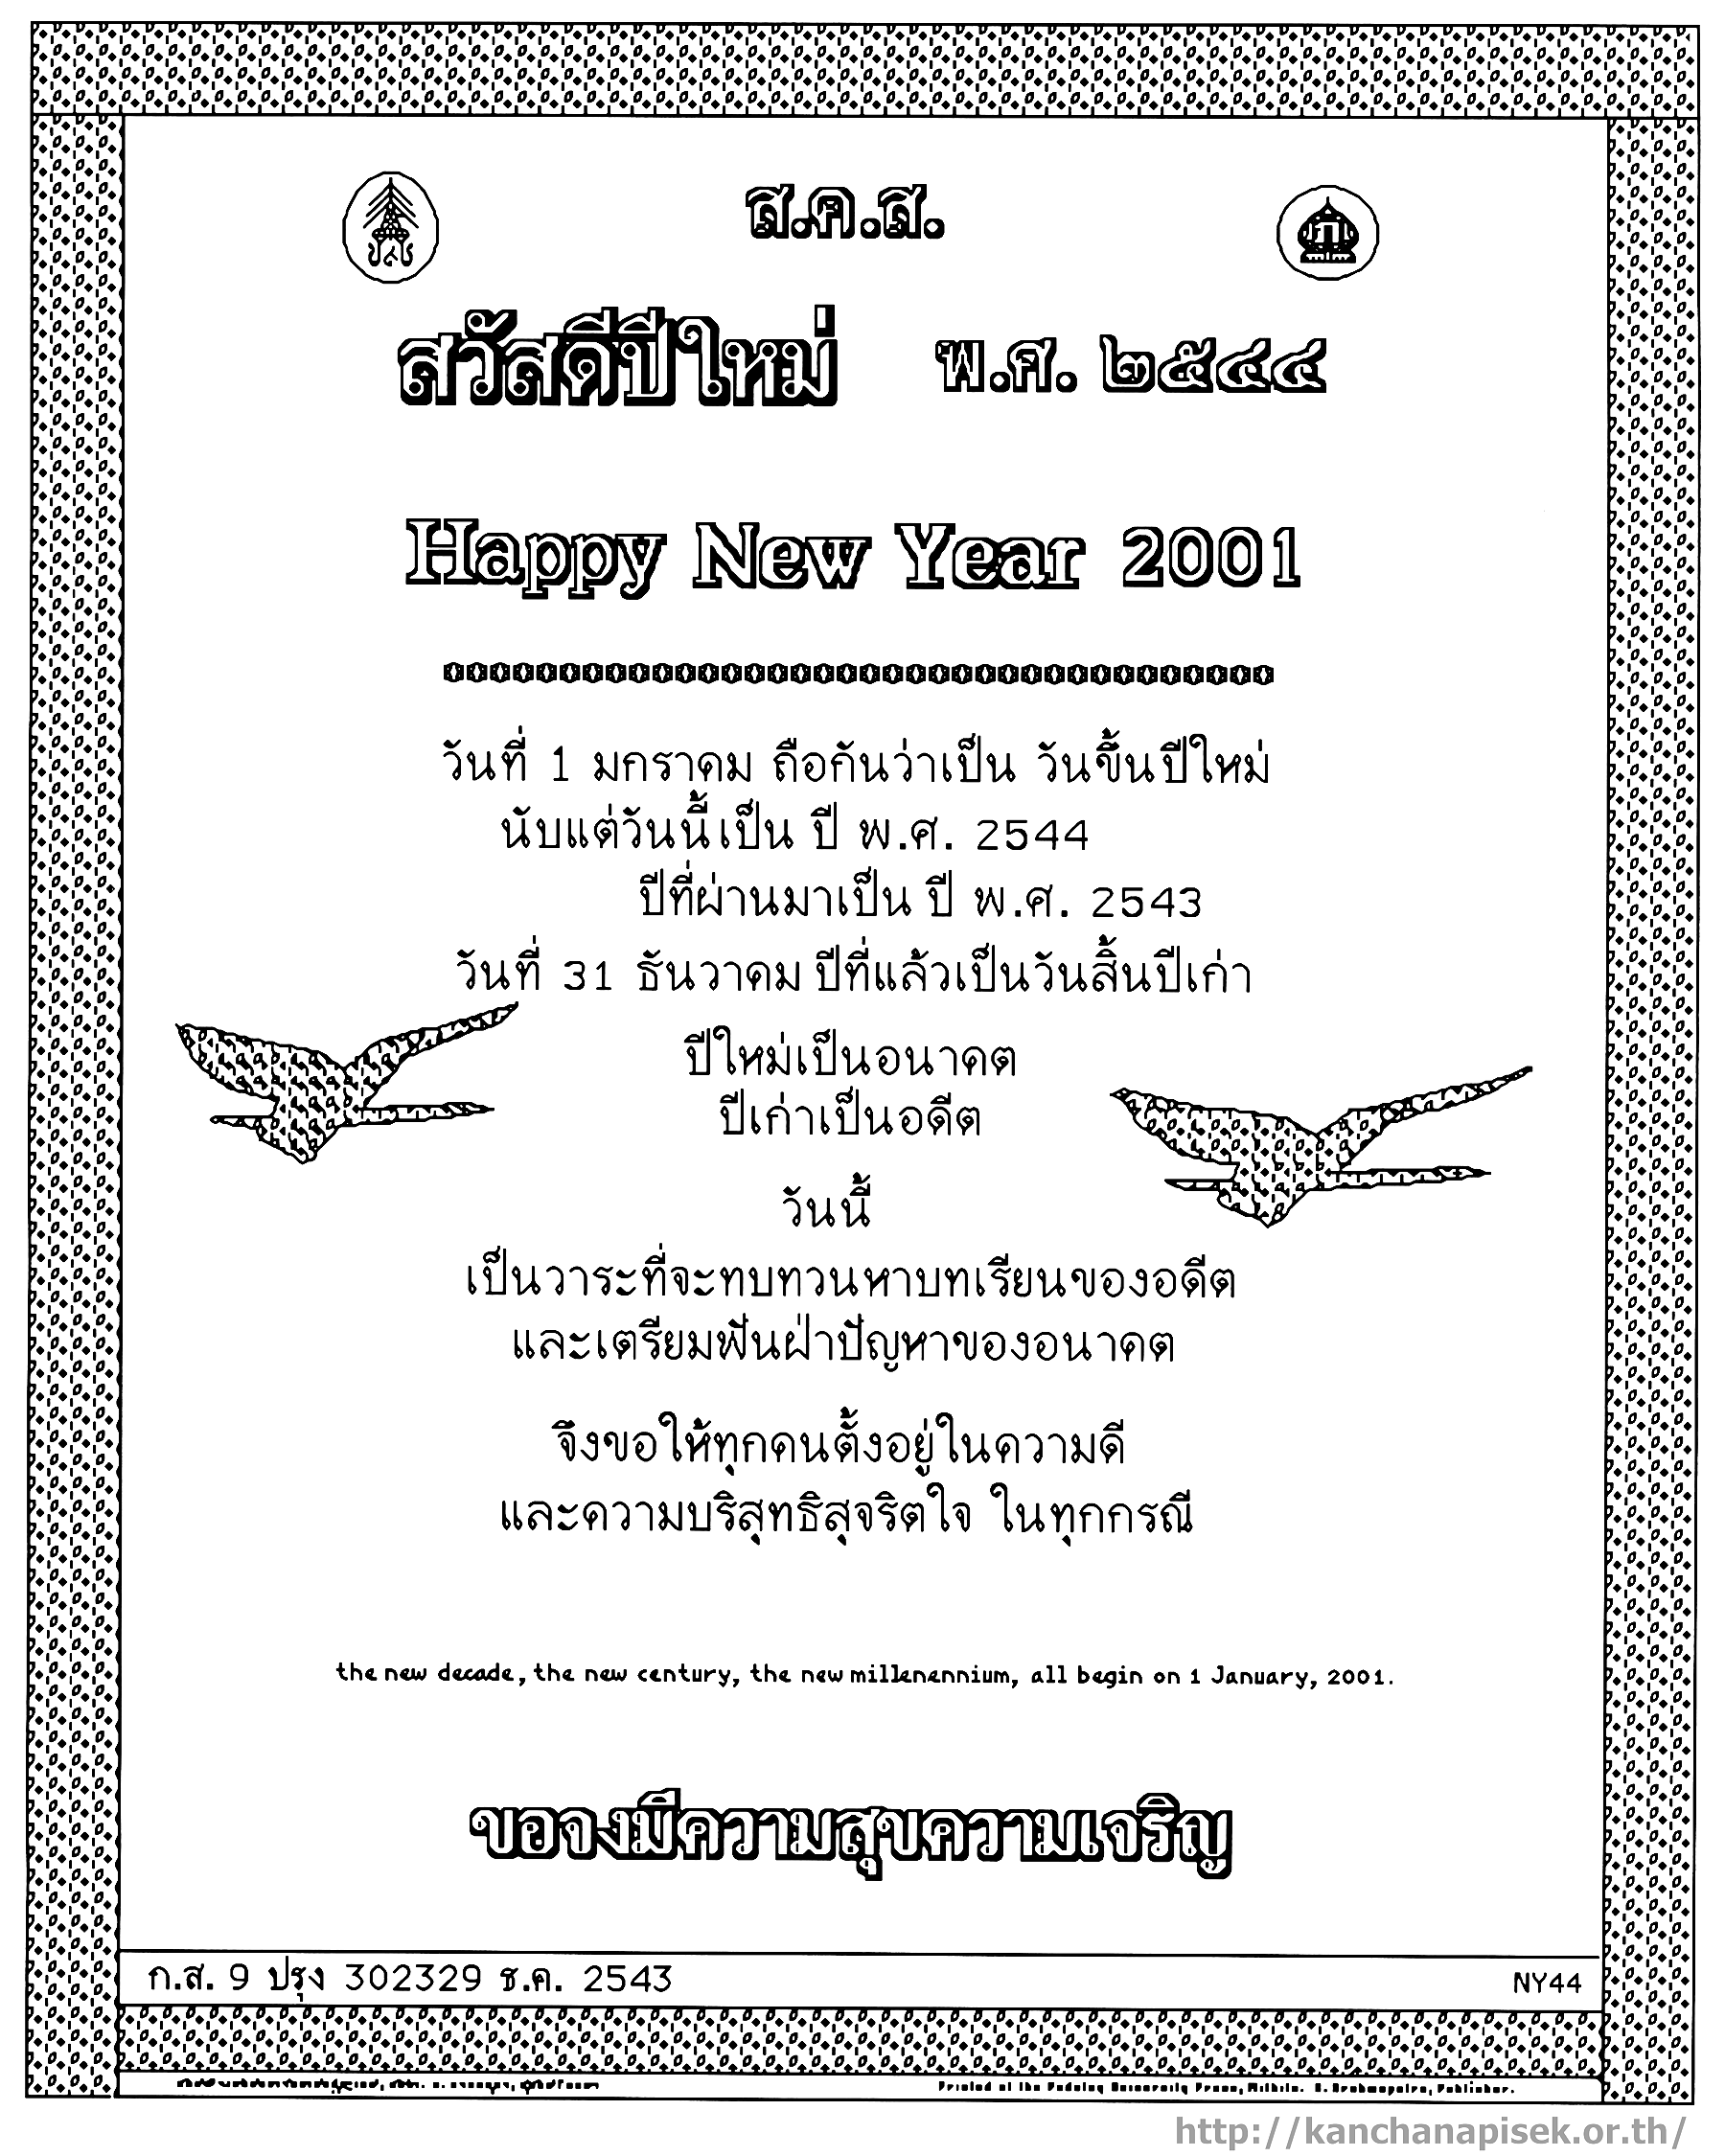 the new year card 800 pixel, 332KB.